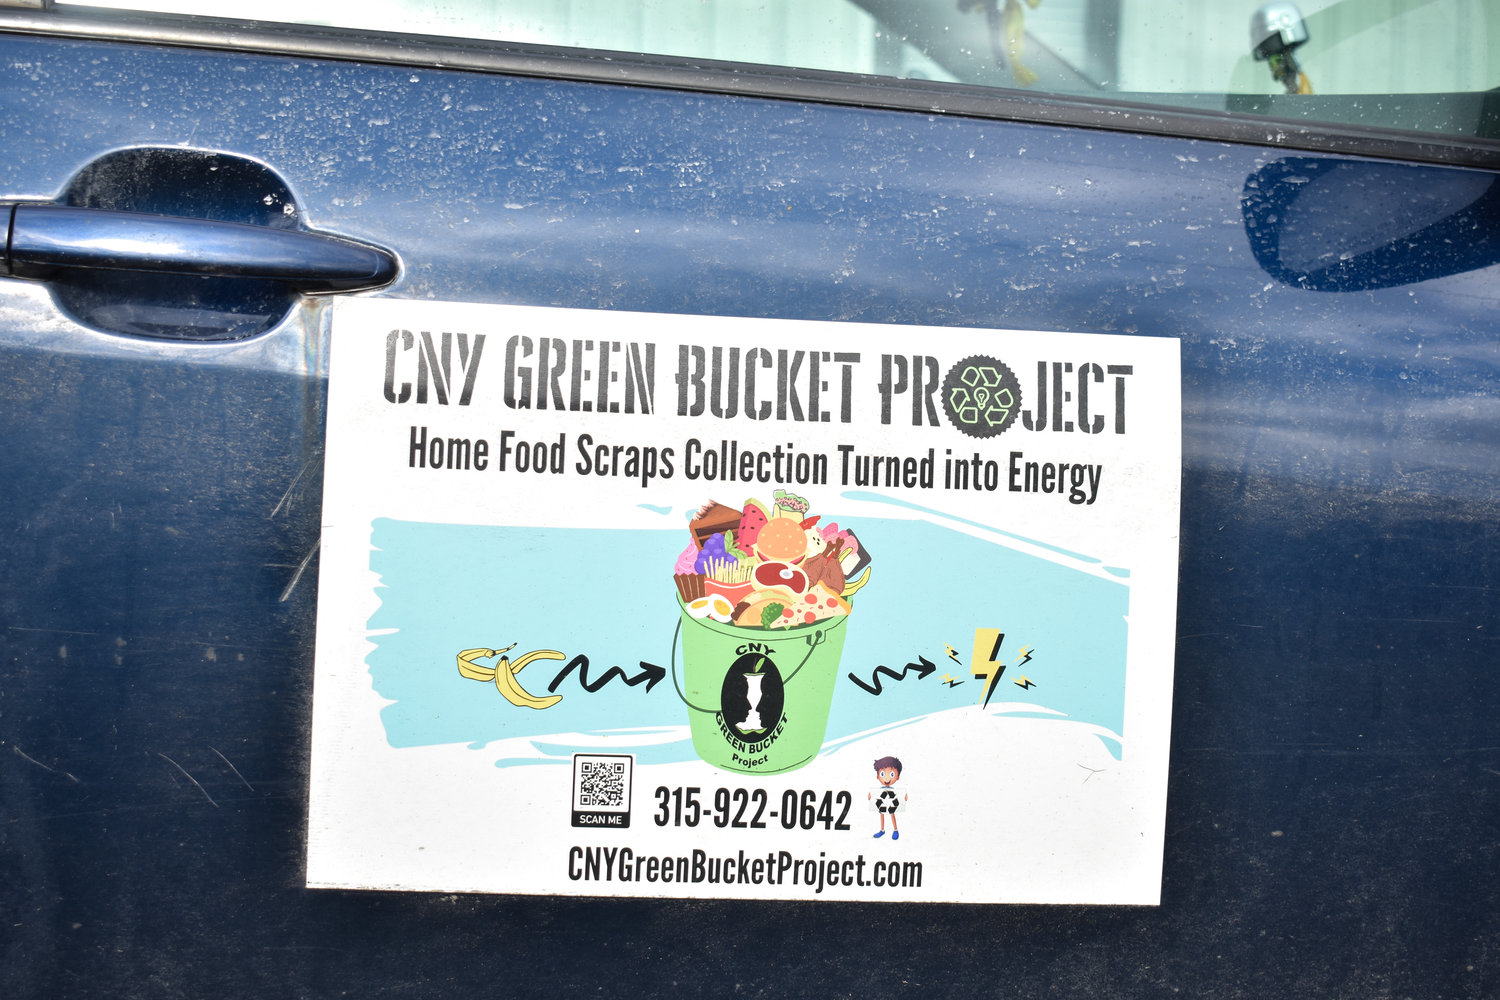 Clients in Clinton, Utica, New Hartford, New York Mills, and surrounding areas can get their food scraps picked up bi-weekly by CNY Green Bucket Project to turn them into energy.